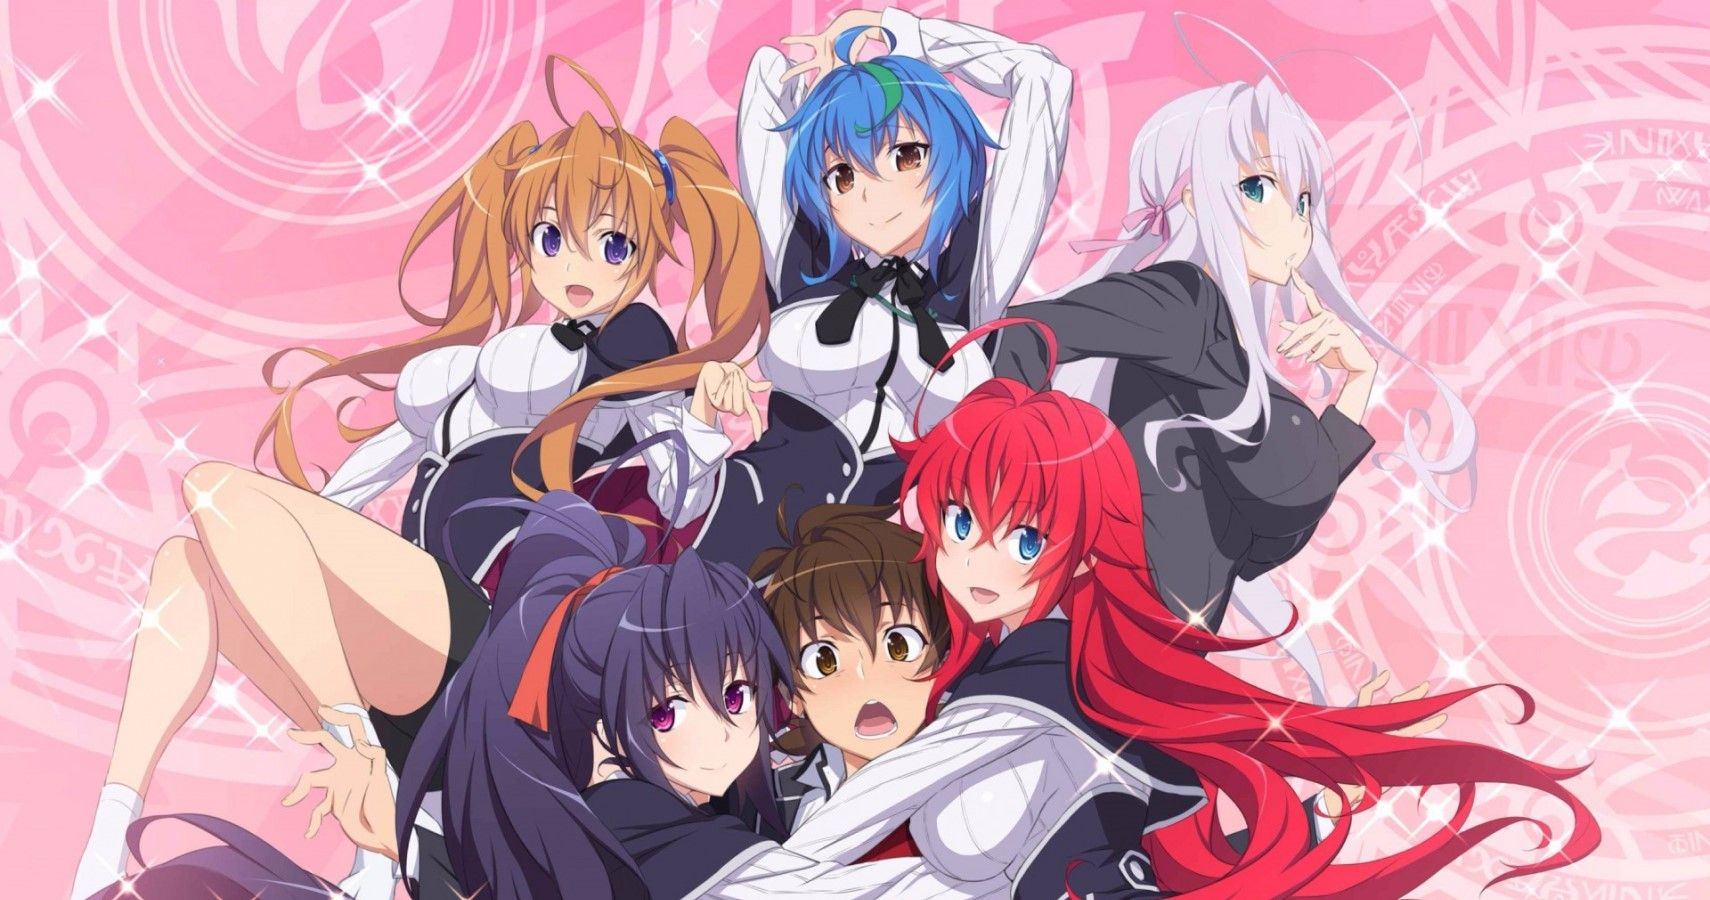 5 Things You Never See In Harem Anime (& 5 Things You See Way Too